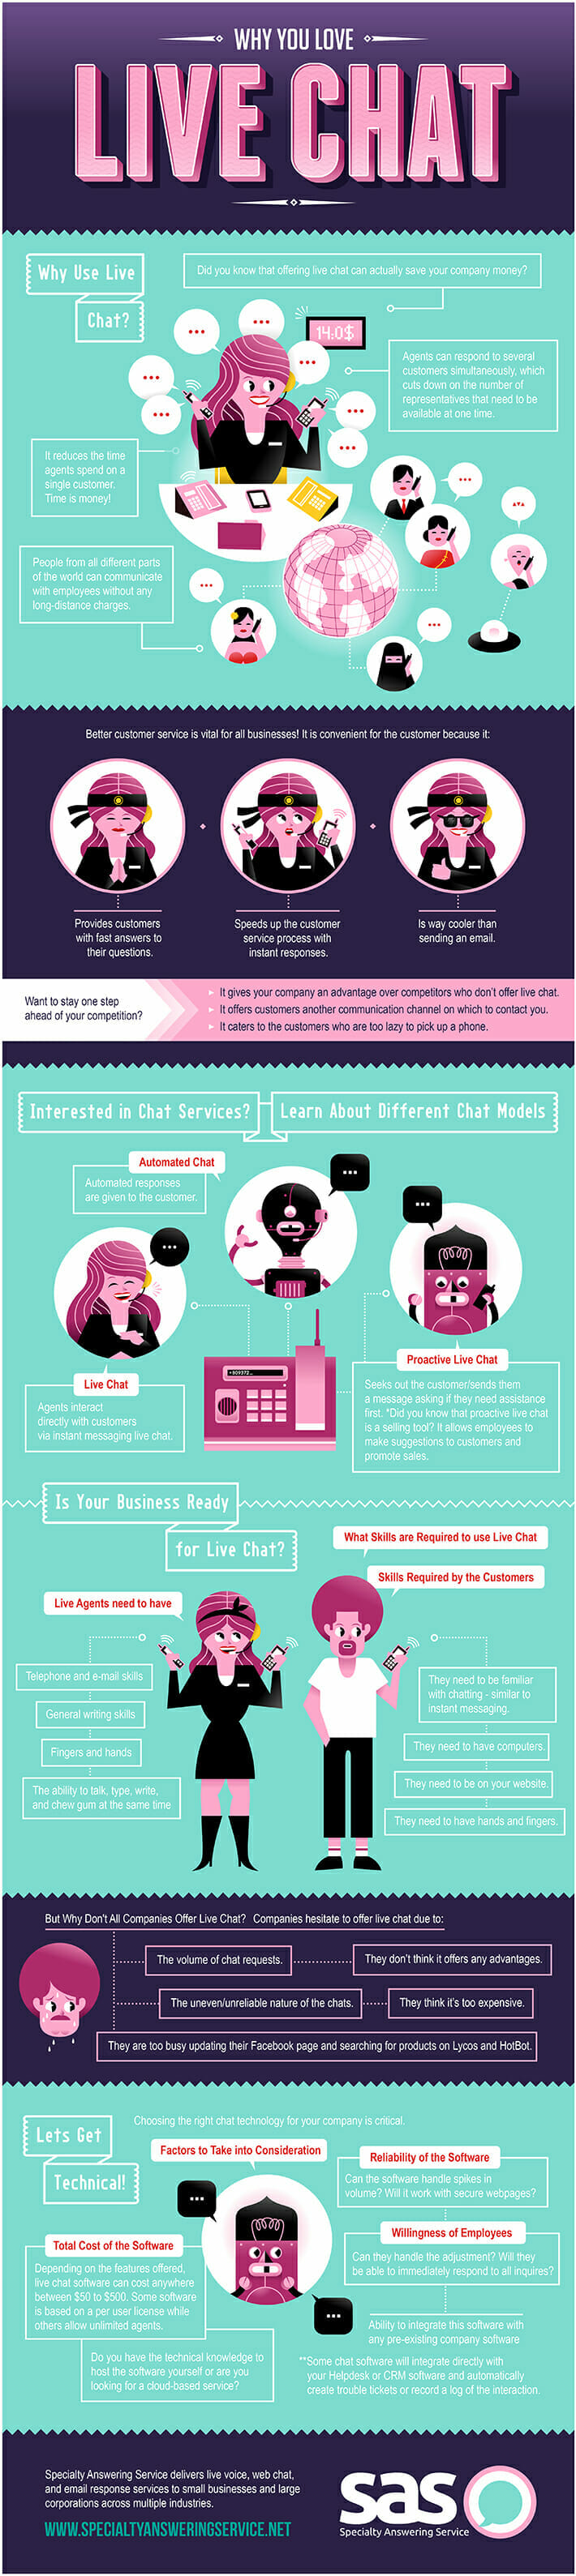 Infographic explaining live chat services